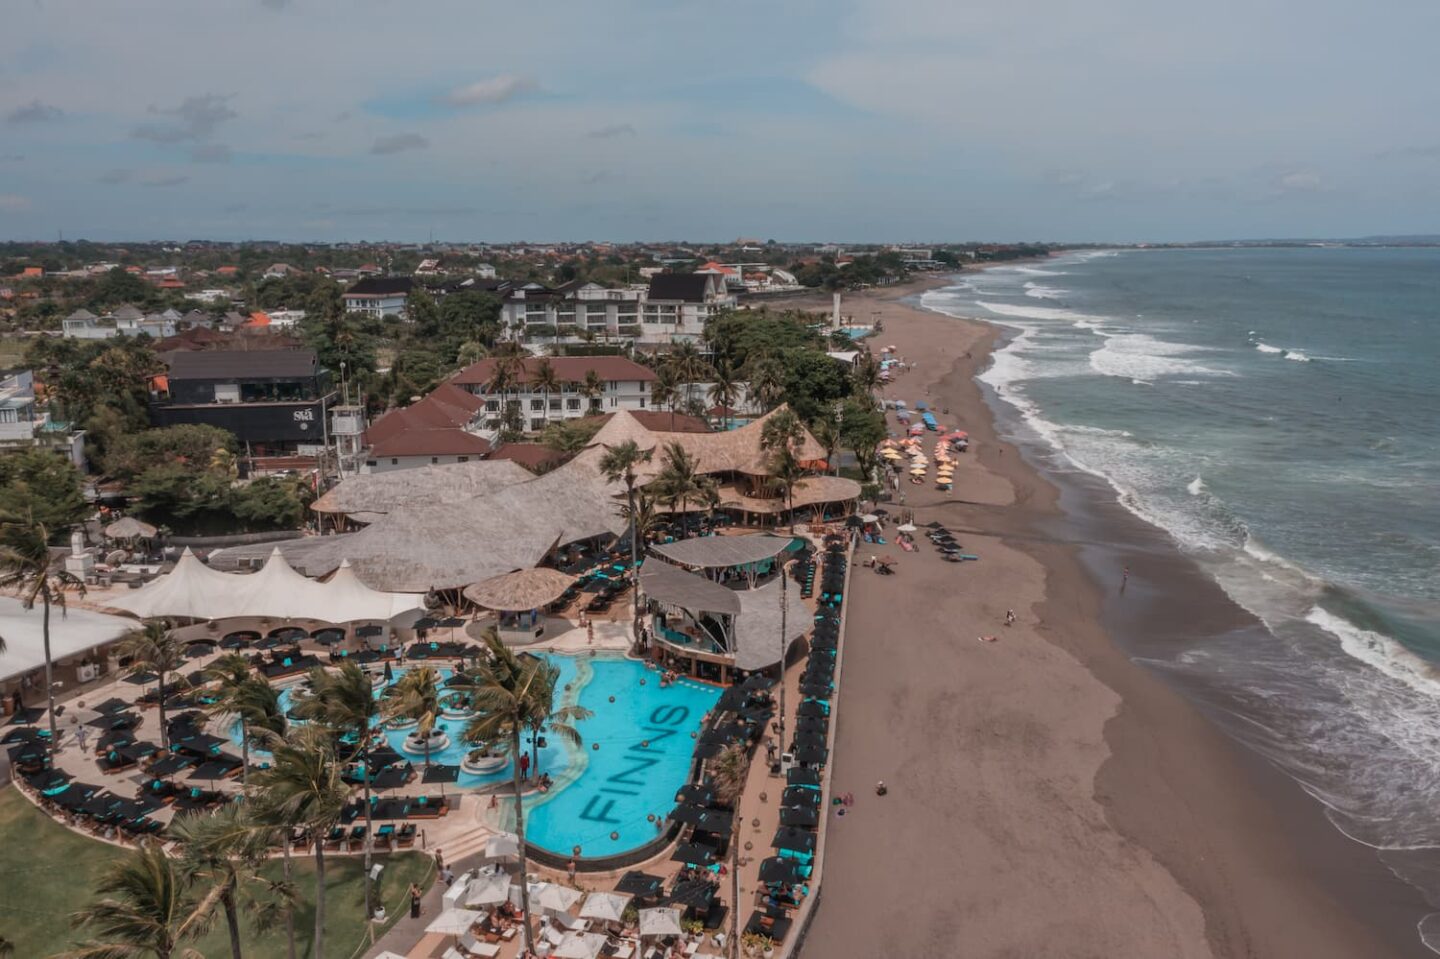 Berawa Beach is one of the Canggu Beaches famous for its chic beach clubs.